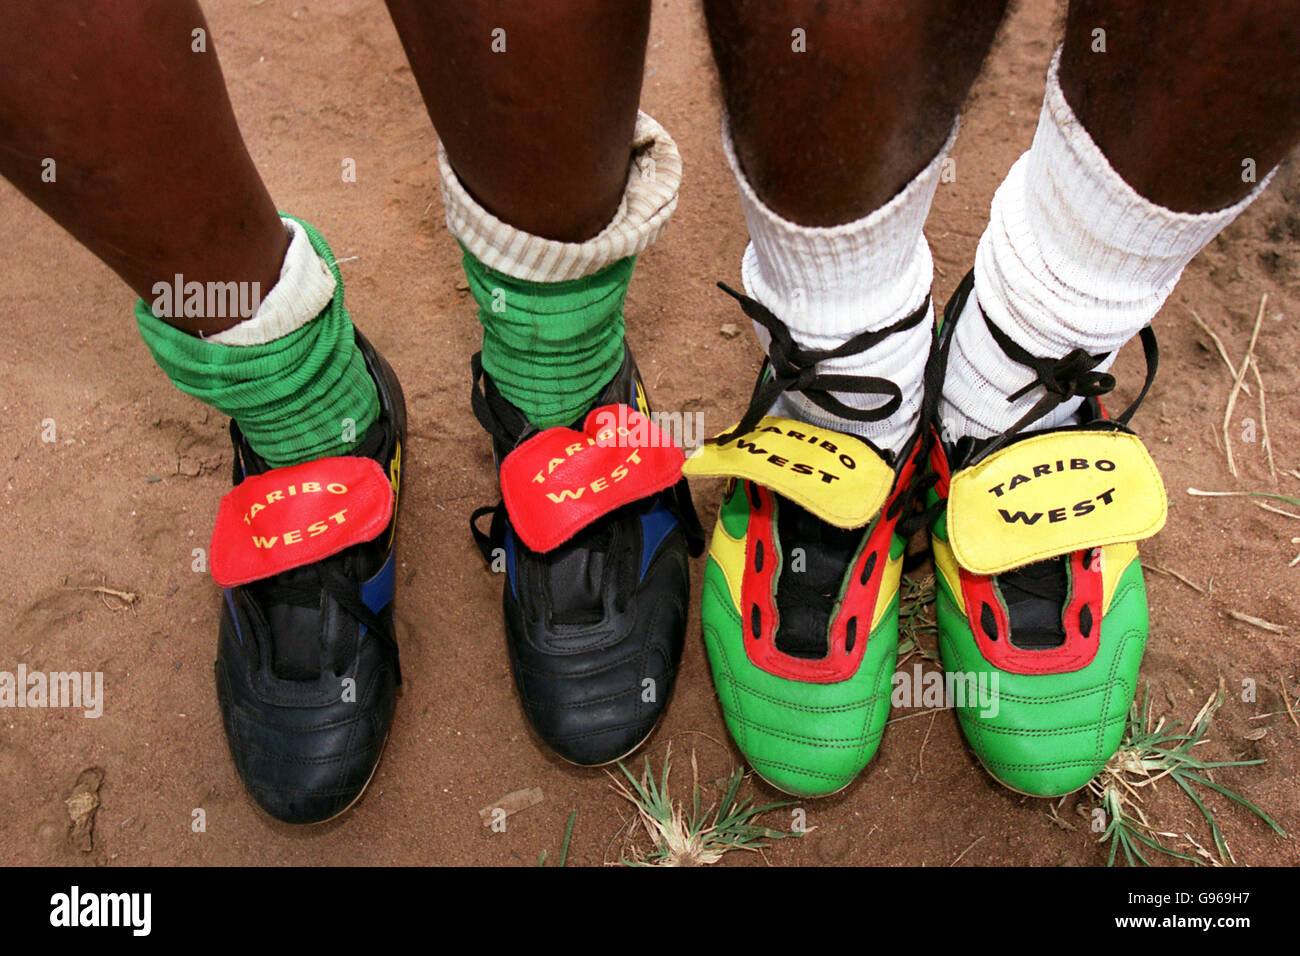 Soccer - FIFA World Youth Championships - Nigeria '99 - Taribo West Academy. Two members of the Taribo West Academy wearing Taribo West brand boots, donated by the Inter Milan star Stock Photo